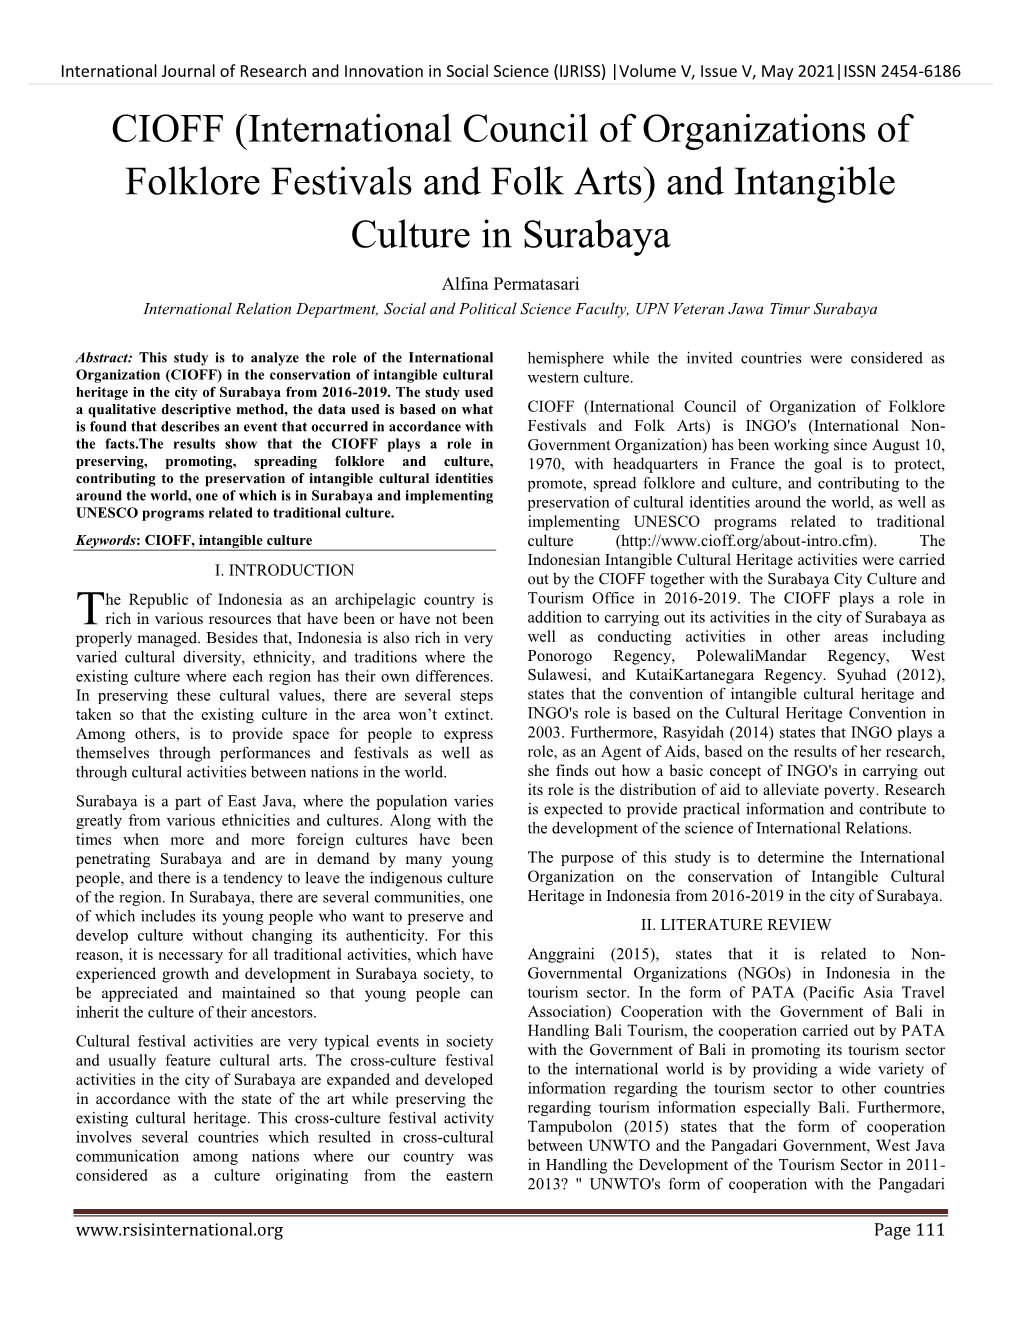 CIOFF (International Council of Organizations of Folklore Festivals and Folk Arts) and Intangible Culture in Surabaya